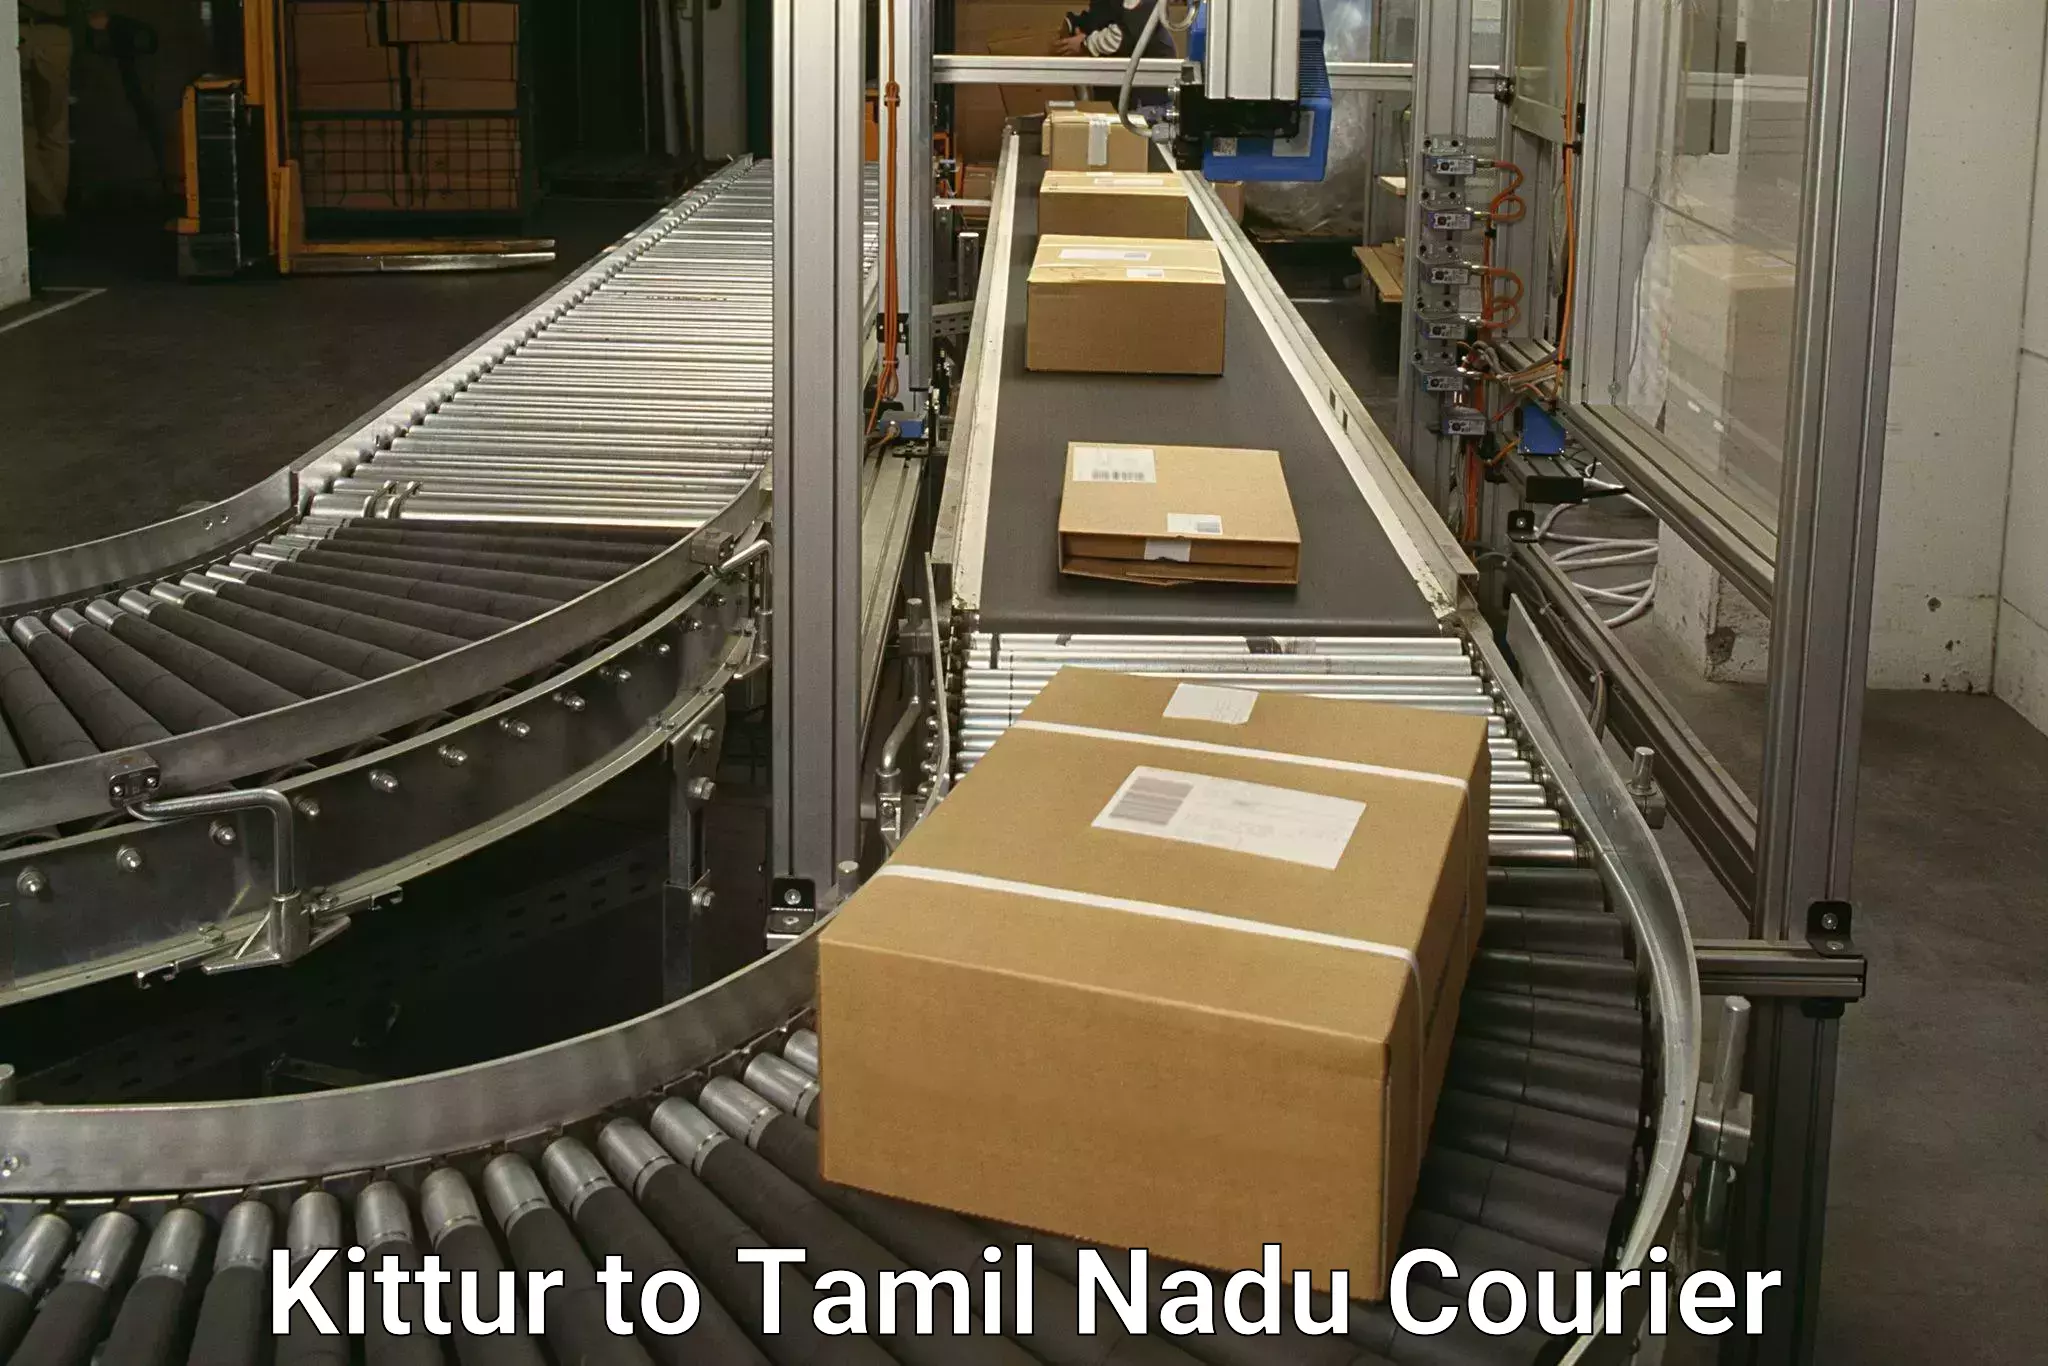 Advanced delivery network Kittur to Coimbatore